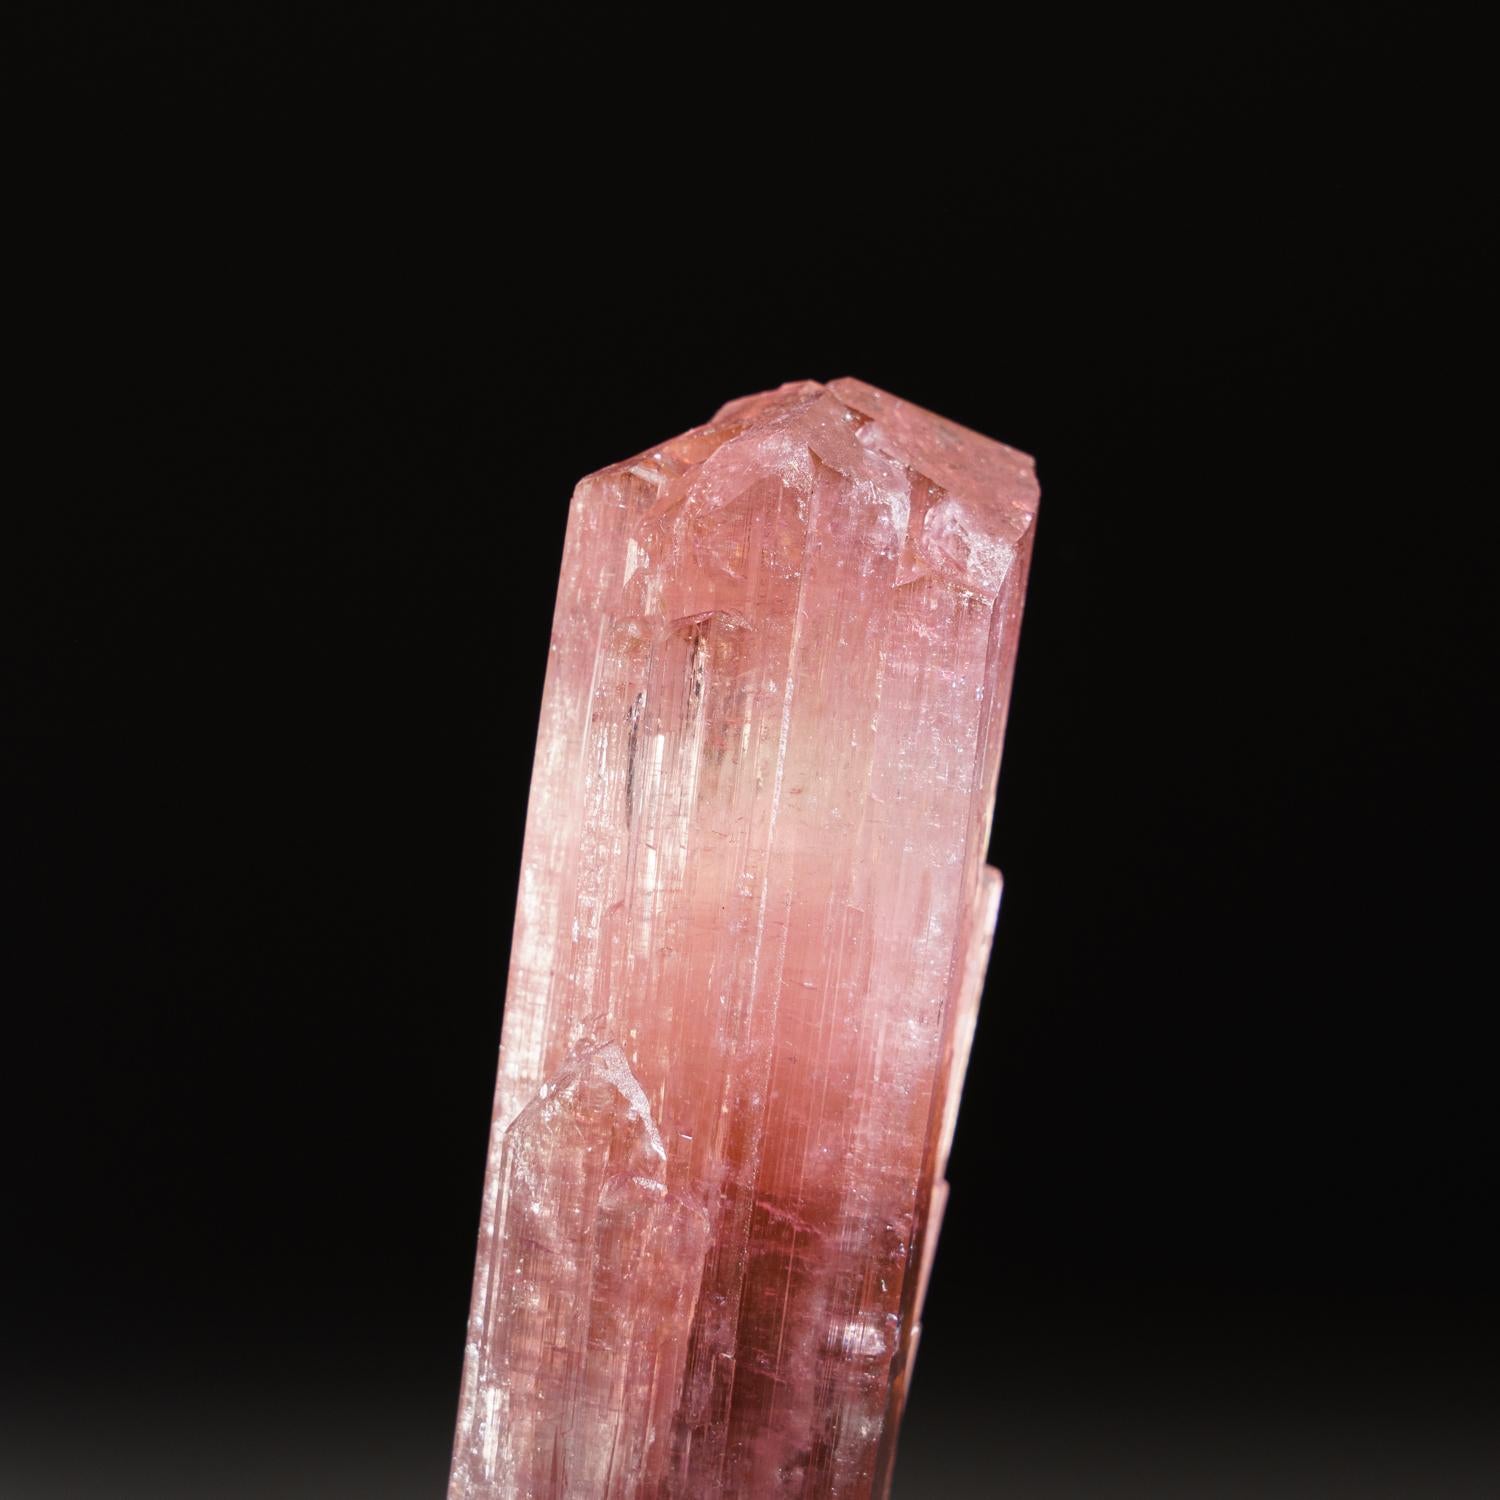 From Paprok, Kamdesh District, Nuristan Province, Afghanistan

Large watermelon pink elbaite tourmaline with transparent lighter pink to cherry red zoning at the top. The tourmaline crystal is well defined with deeply striated crystal faces.